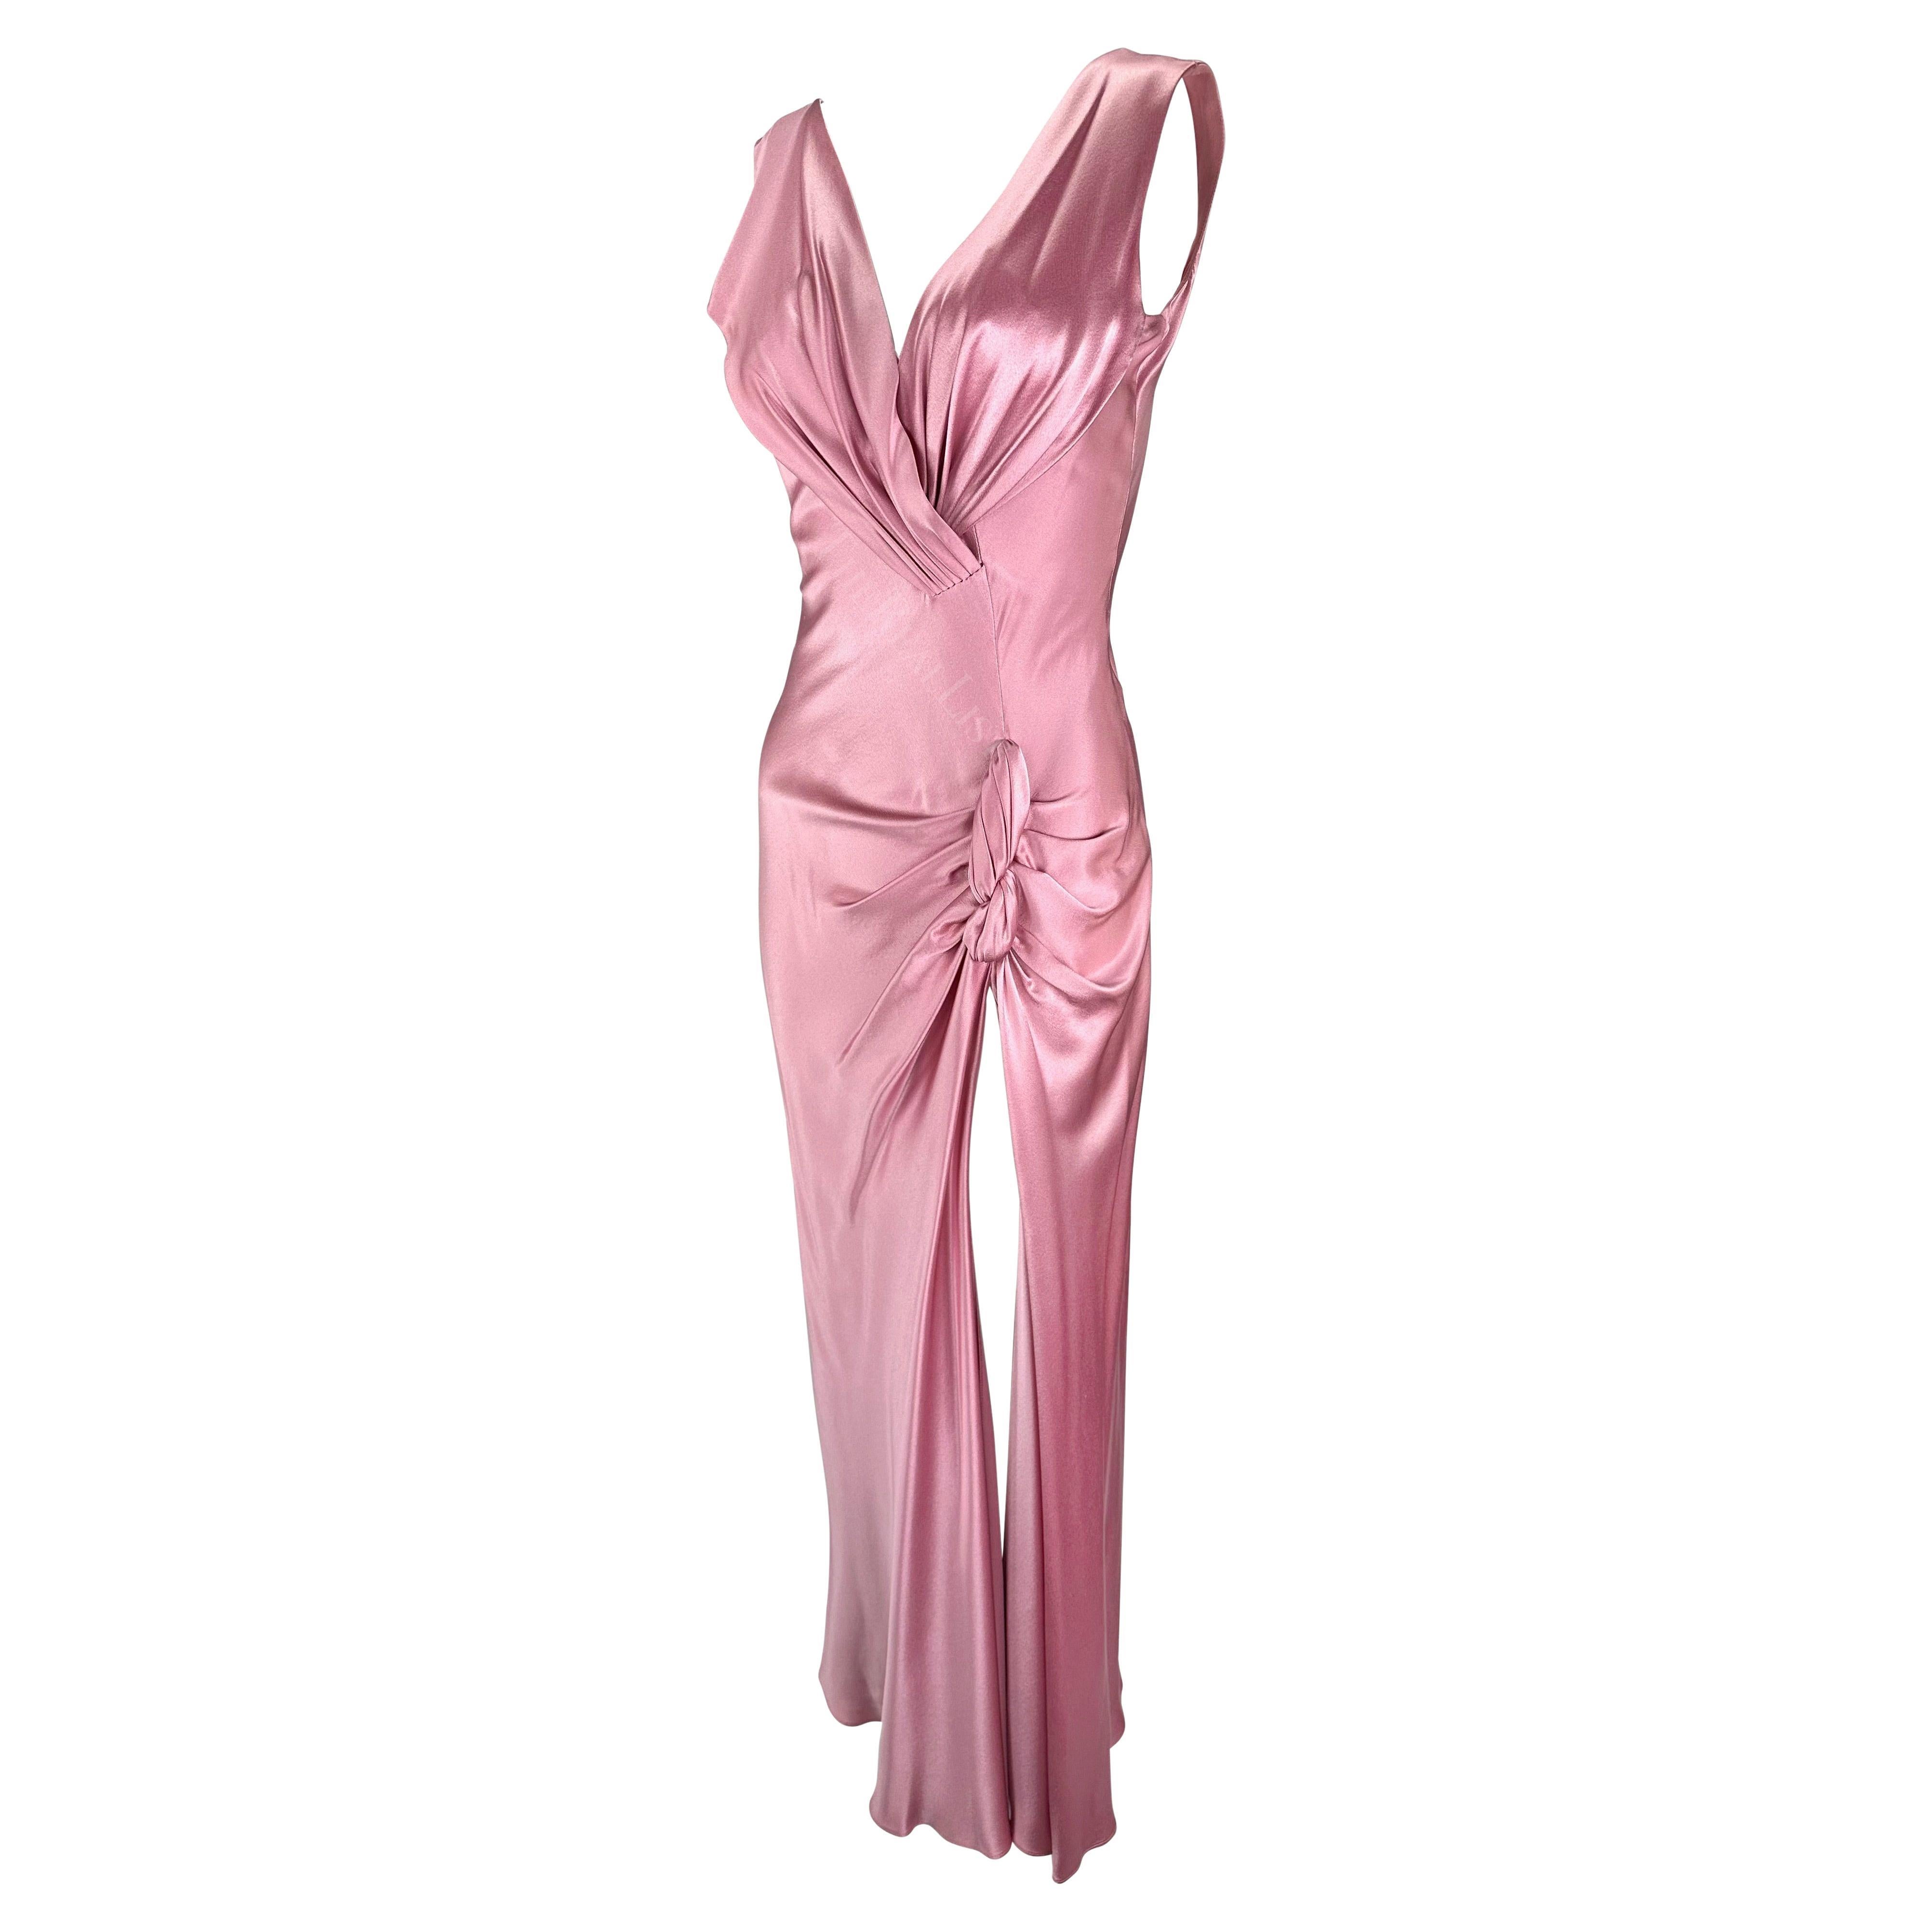 F/W 2003 Christian Dior by John Galliano Rose Pink Silk Satin High Slit Gown In Excellent Condition For Sale In West Hollywood, CA